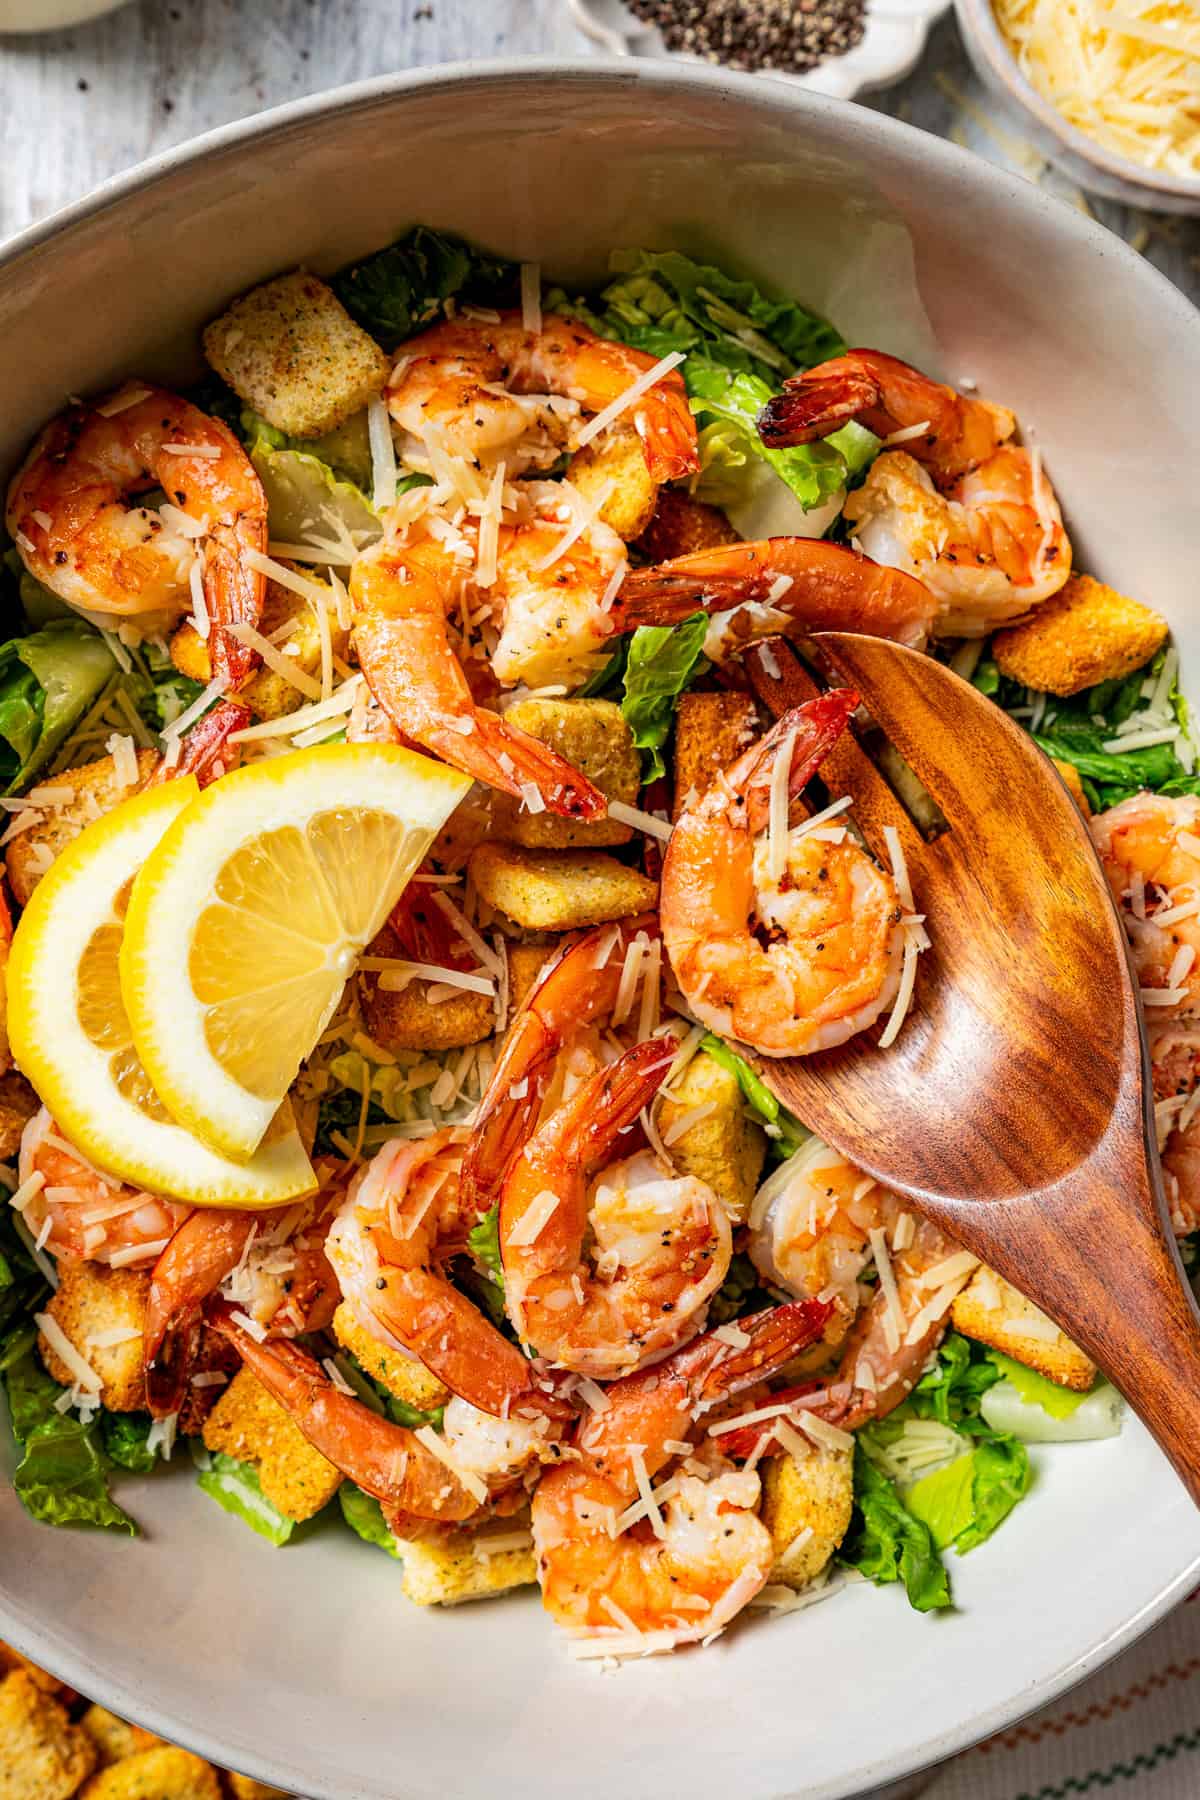 Overhead view of shrimp Caesar salad in a large bowl garnished with lemon wedges next to a wooden salad spoon.